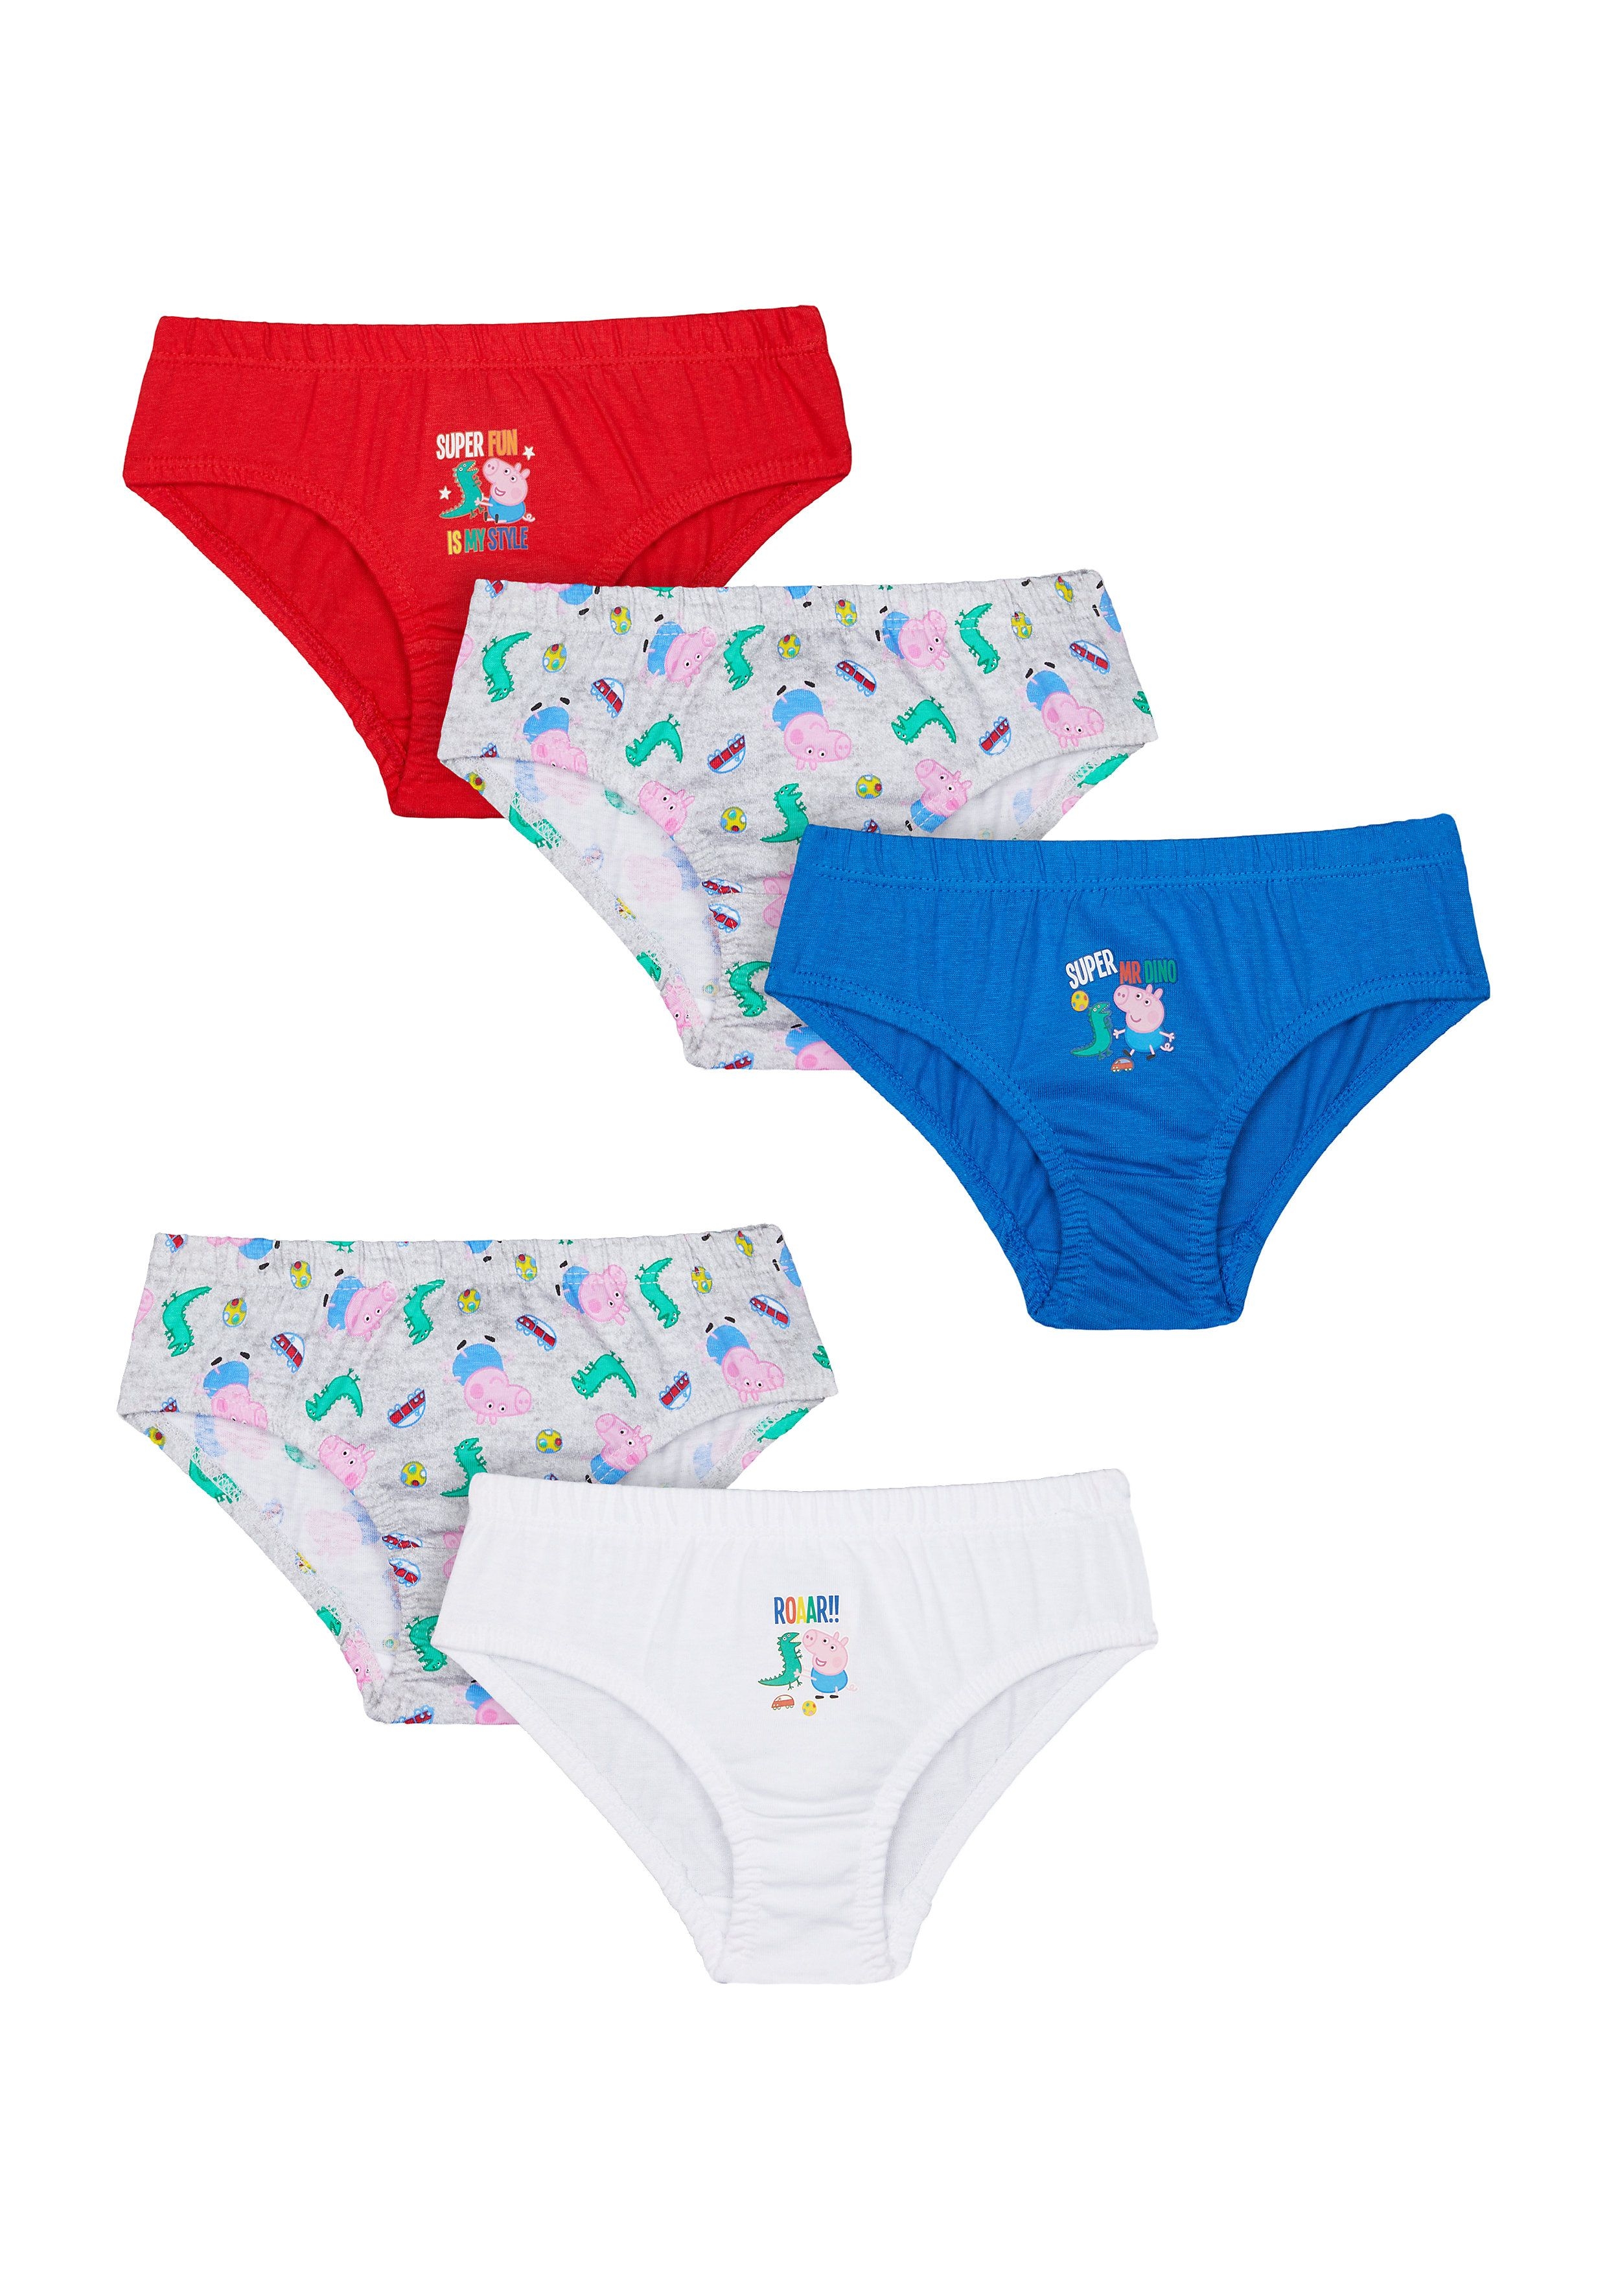 Mothercare | Boys George Pig Briefs - 5 Pack - Multicolor